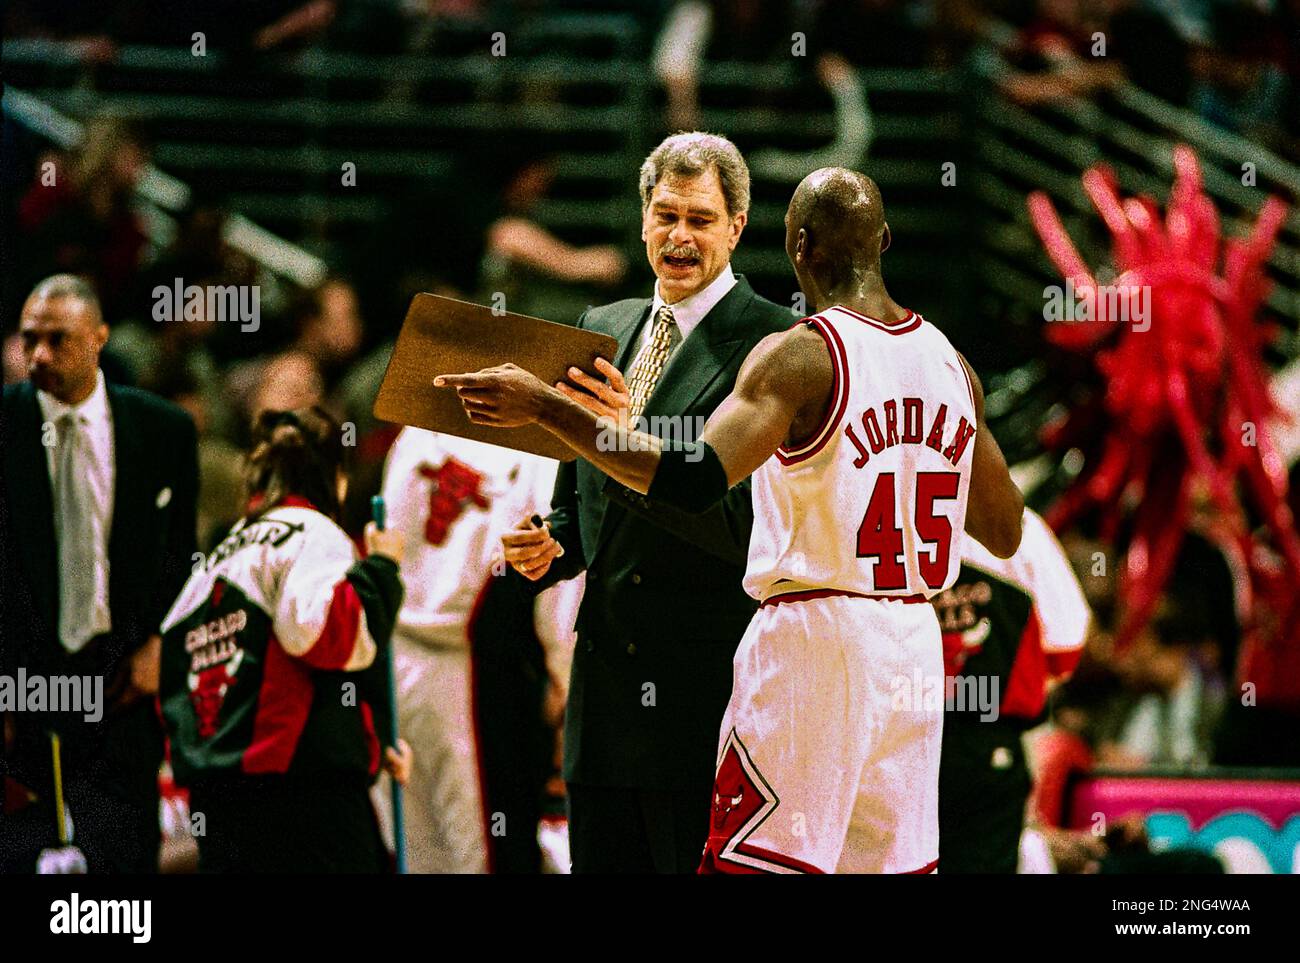 1993 nba allstar game hi-res stock photography and images - Alamy